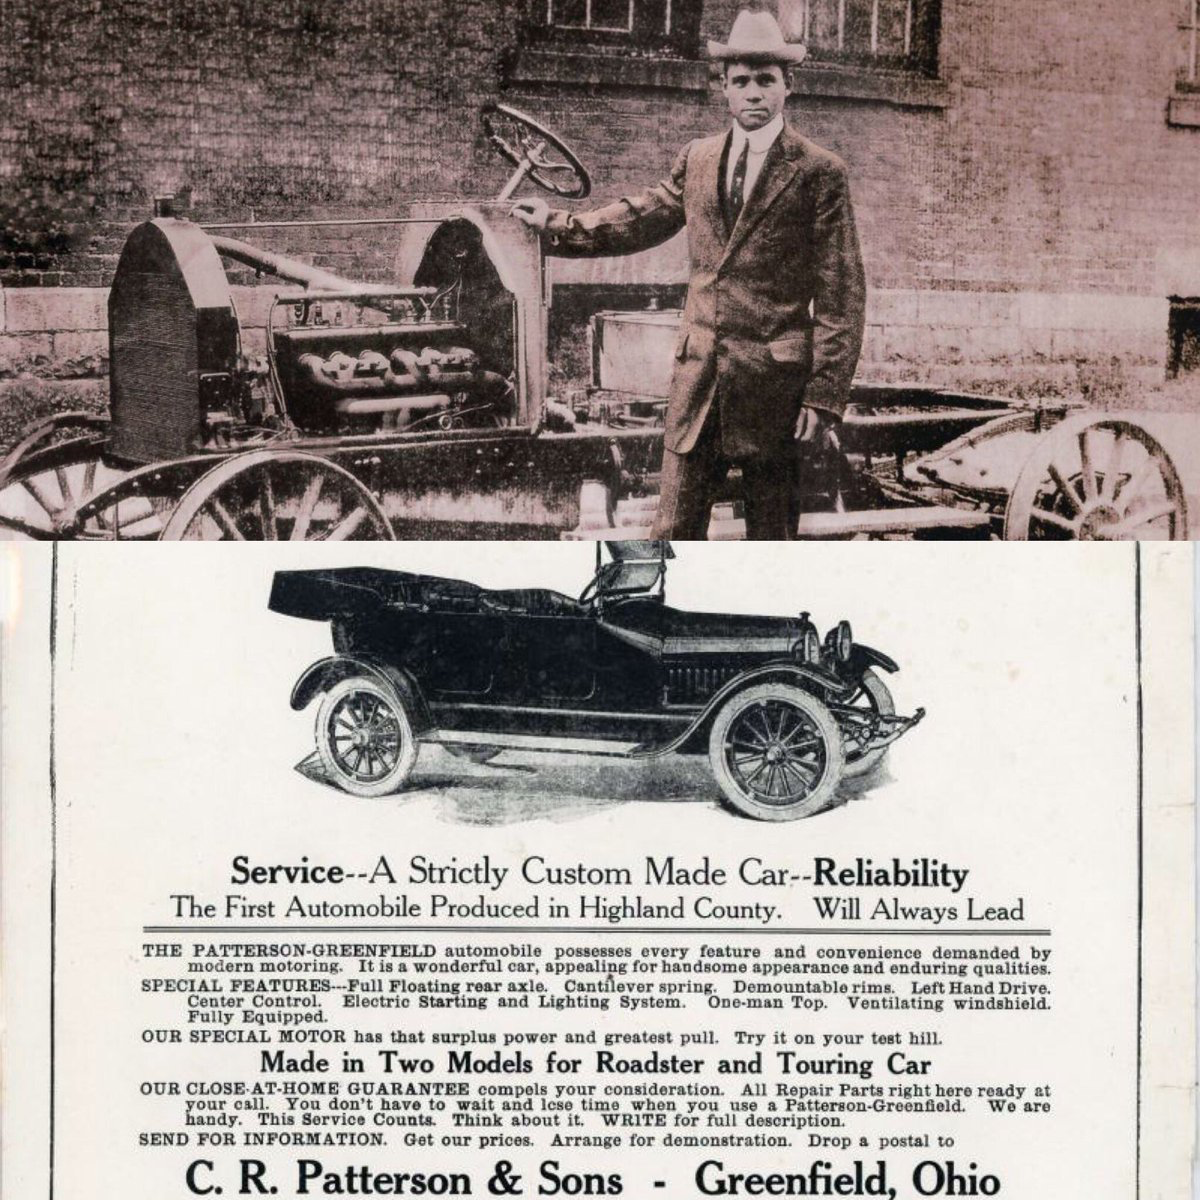 An Automobile Timeline in Great Achievements